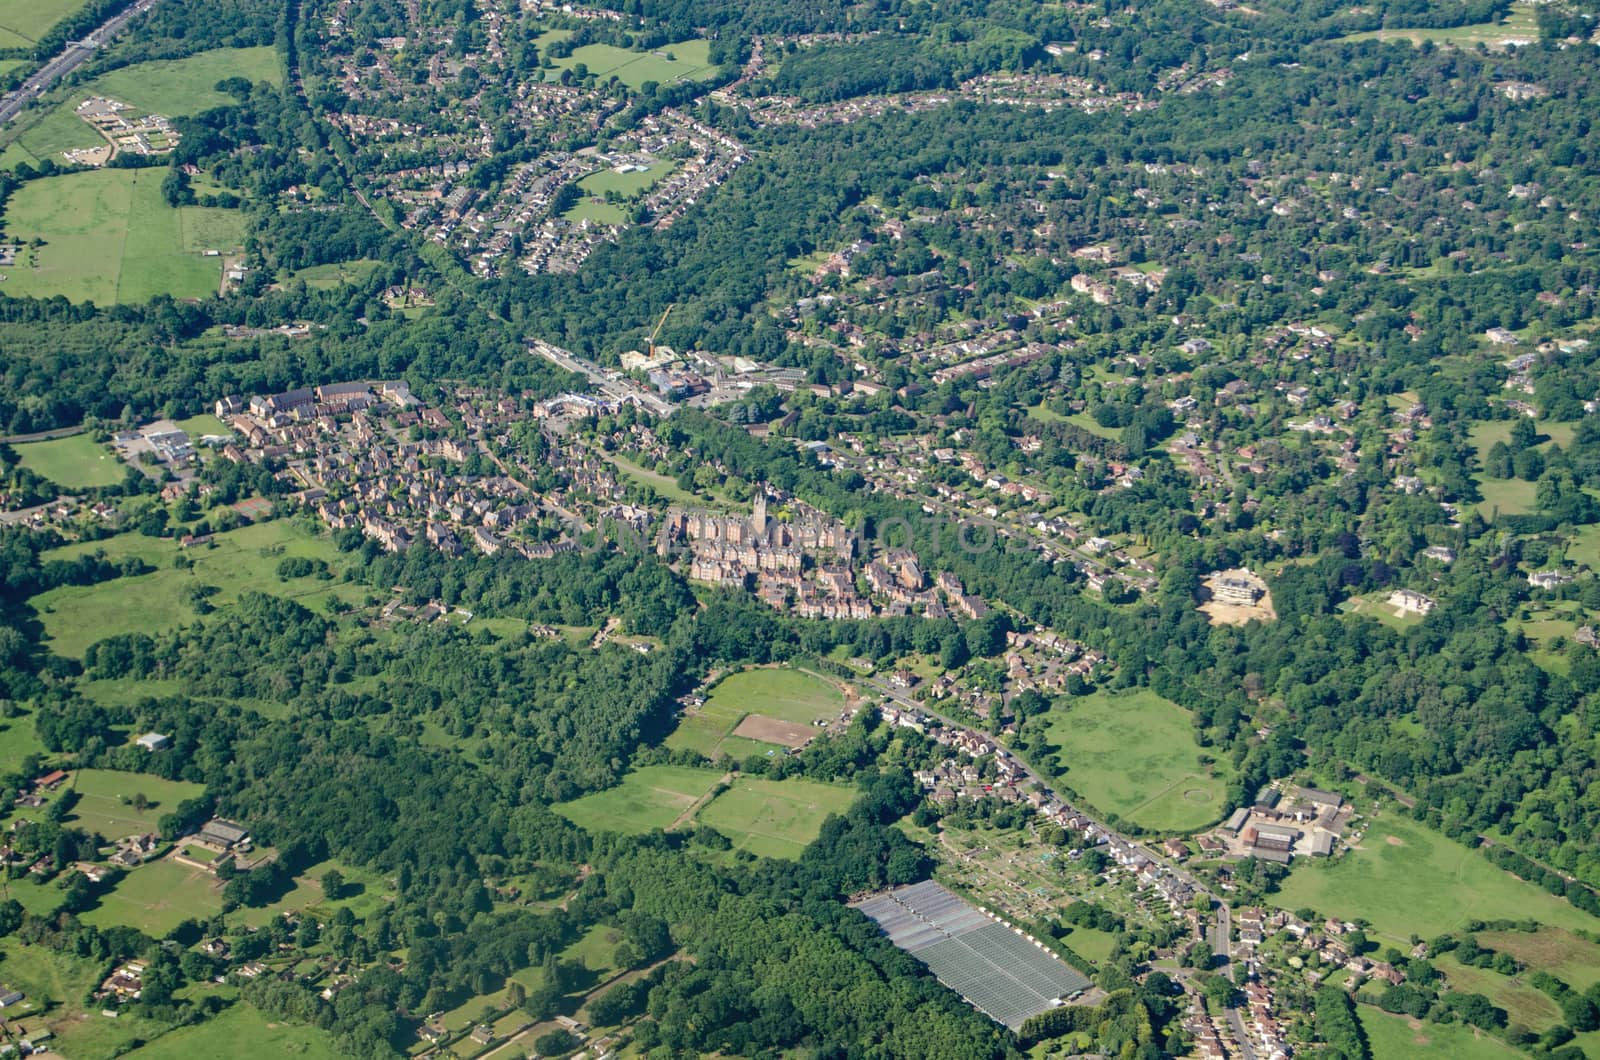 View from a plane of the Surrey town Virginia Water, a wealthy residential area.  The landmark Victorian Gothic former Holloway Sanatorium is towards the middle of the image, it has been converted to a high class residential development.